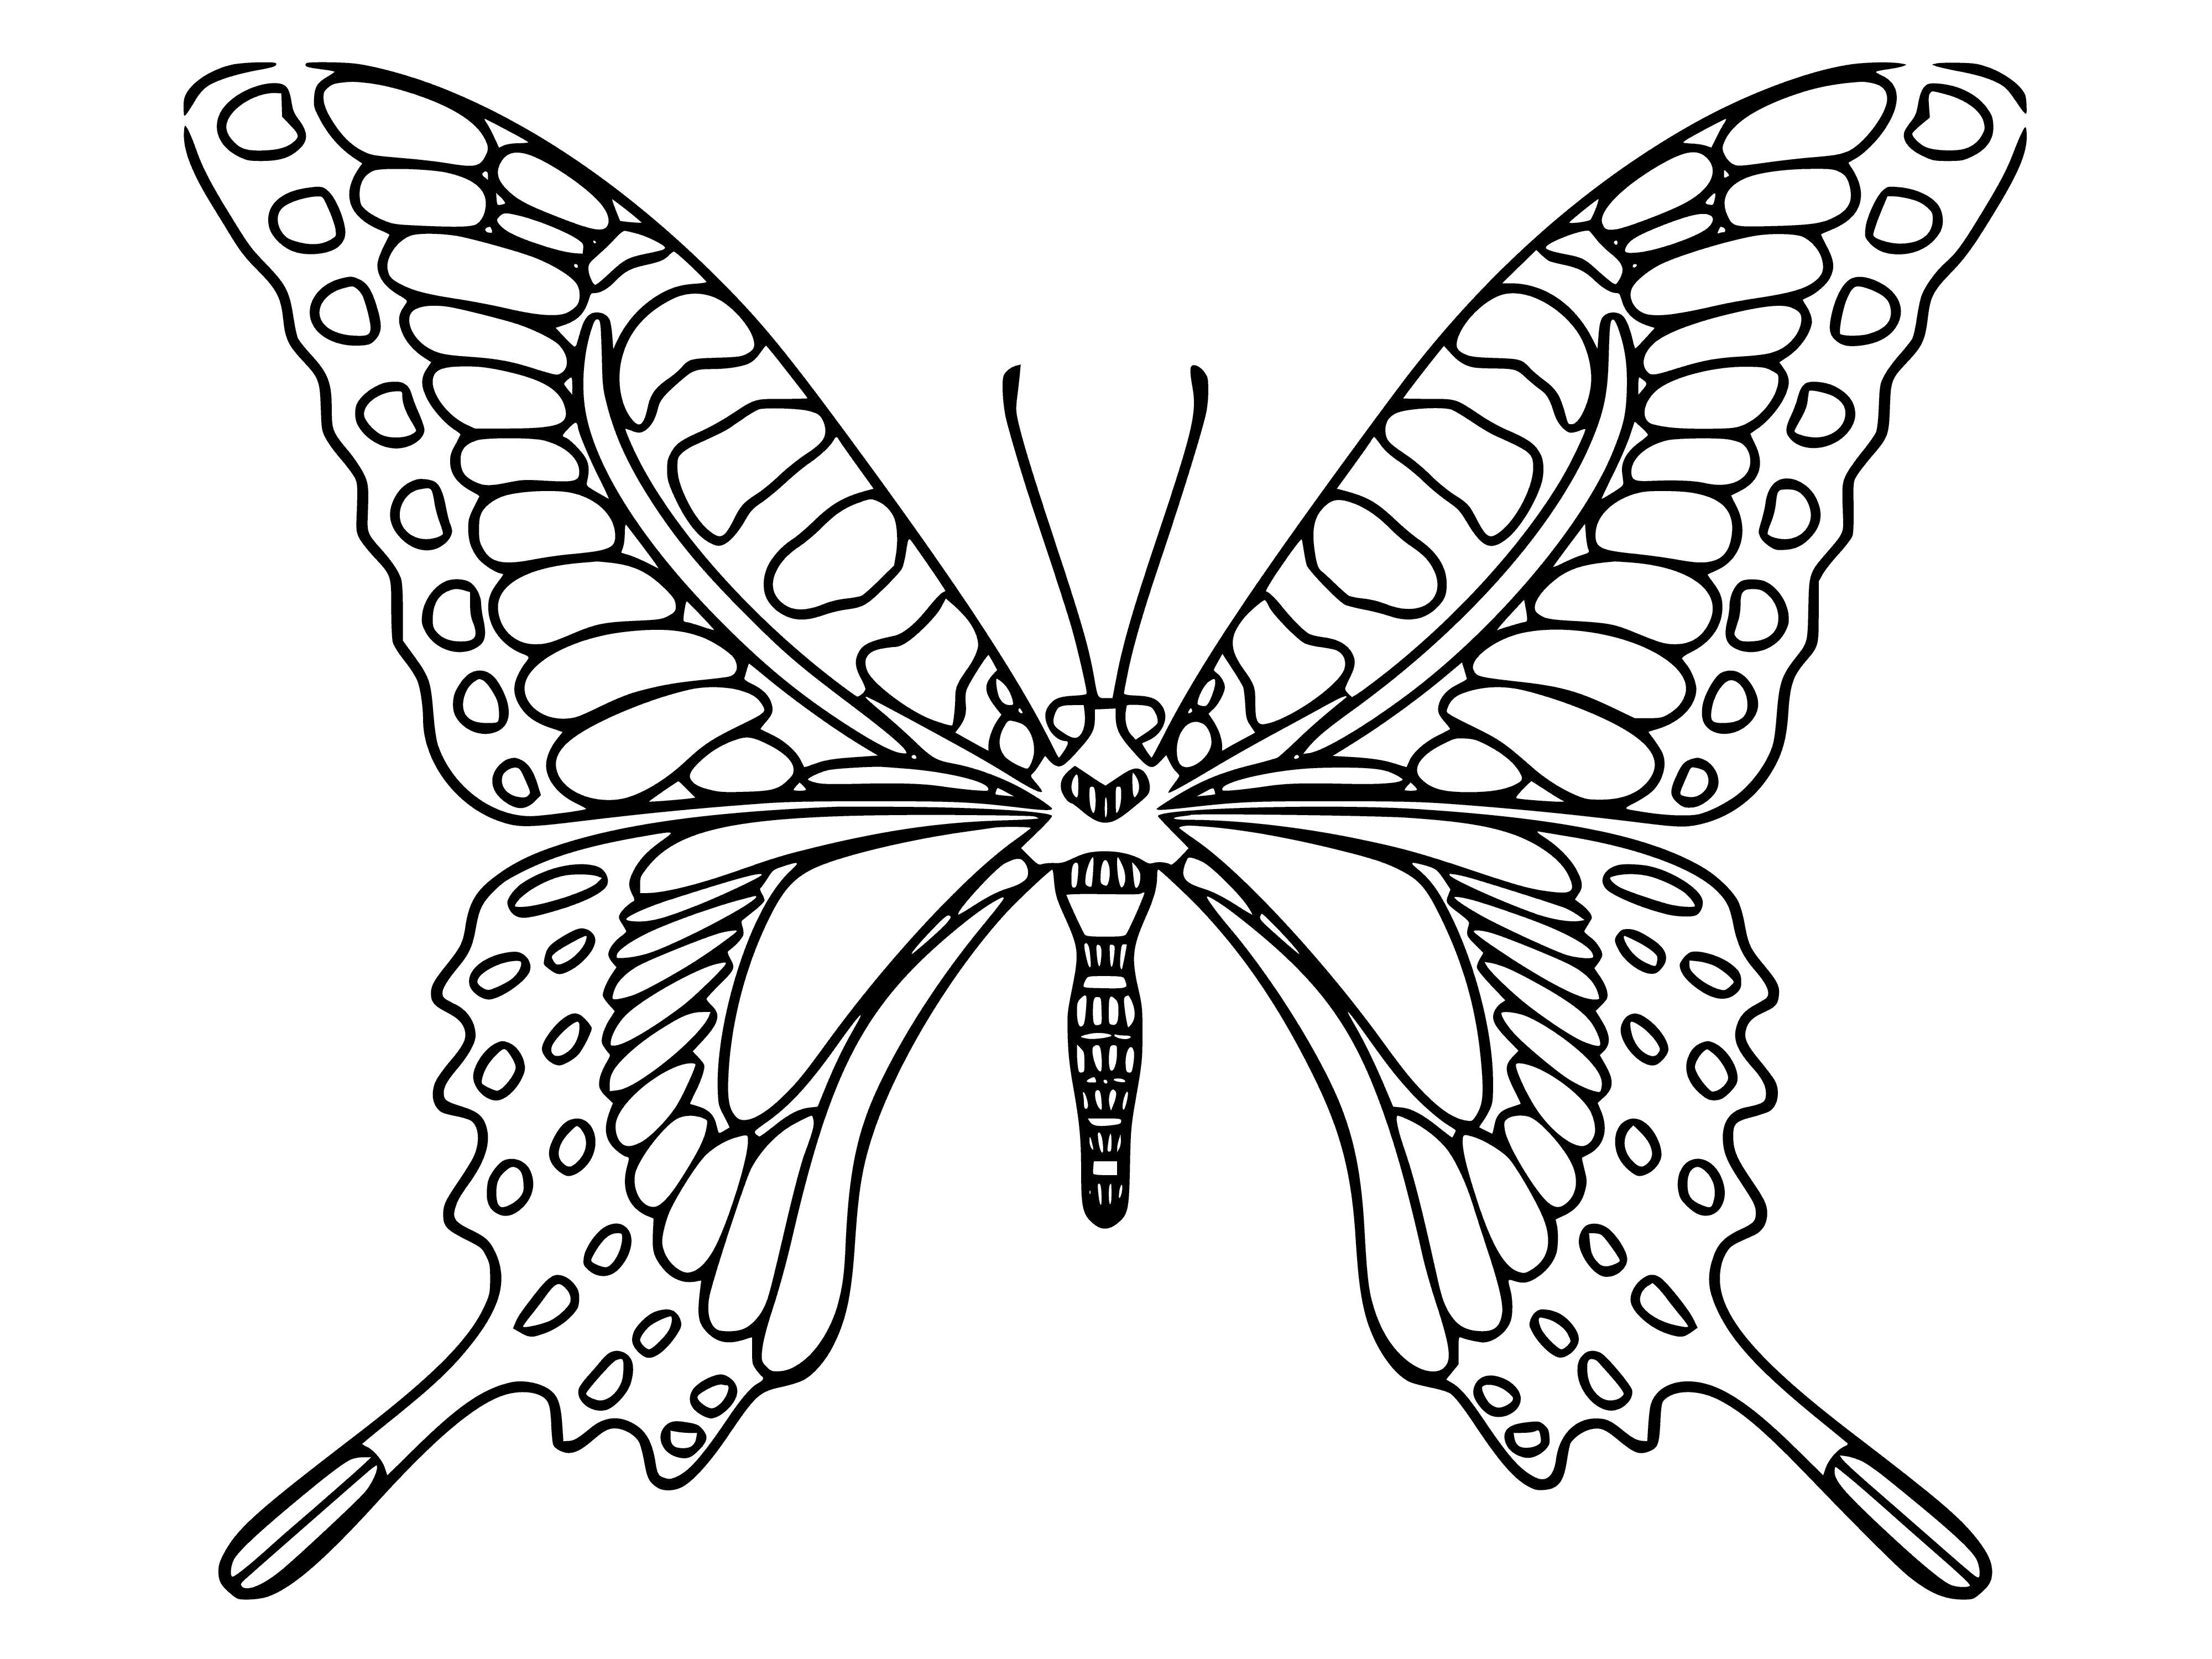 Mahaon coloring page